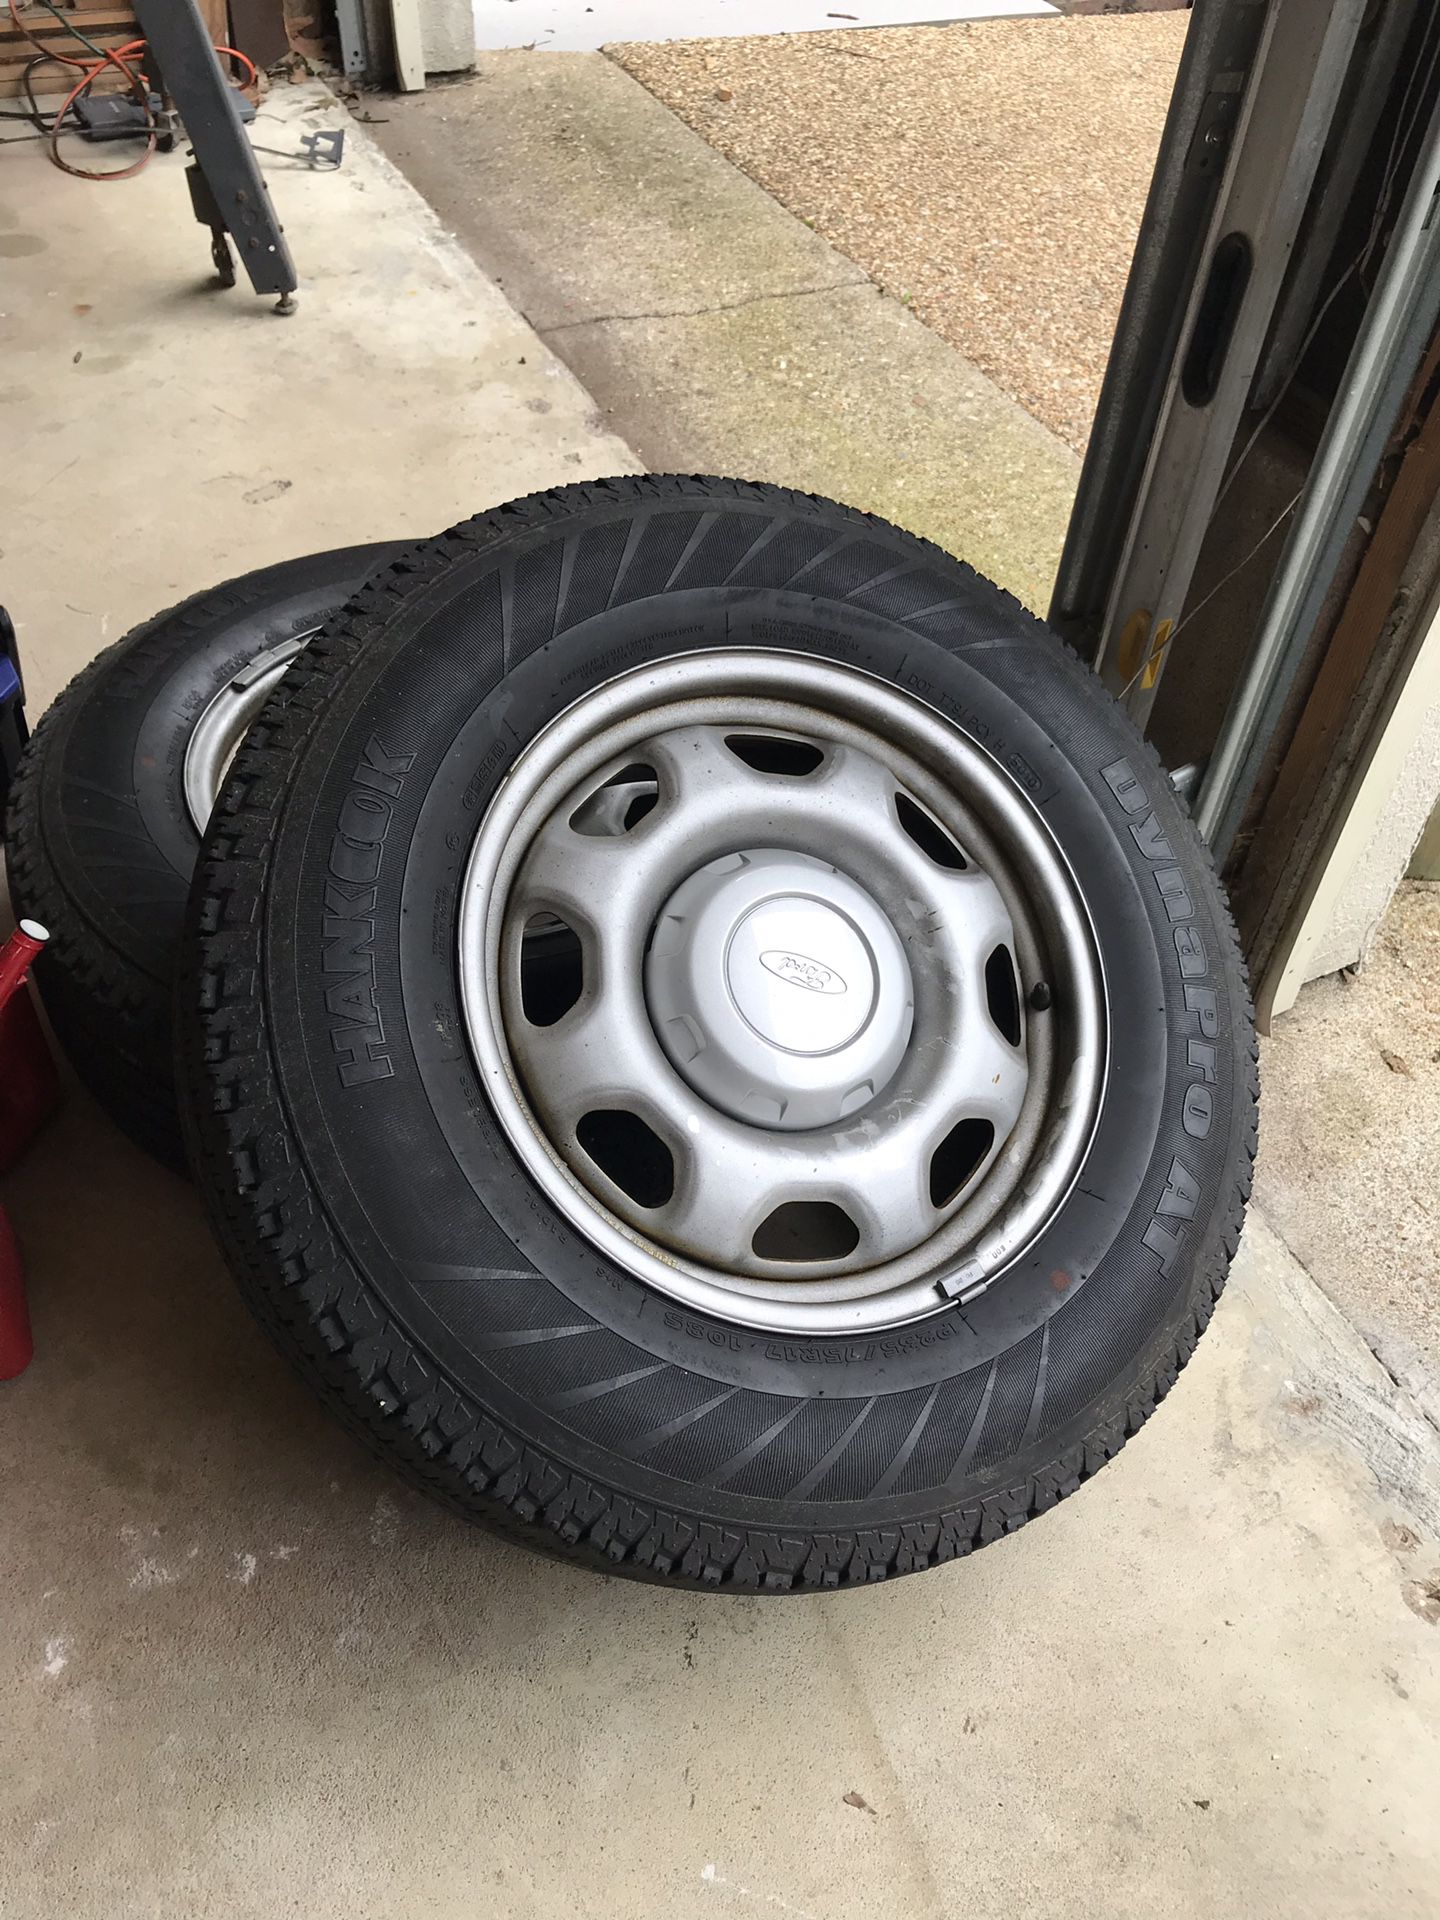 17 inch tires wheels caps and Lugnuts off of F150